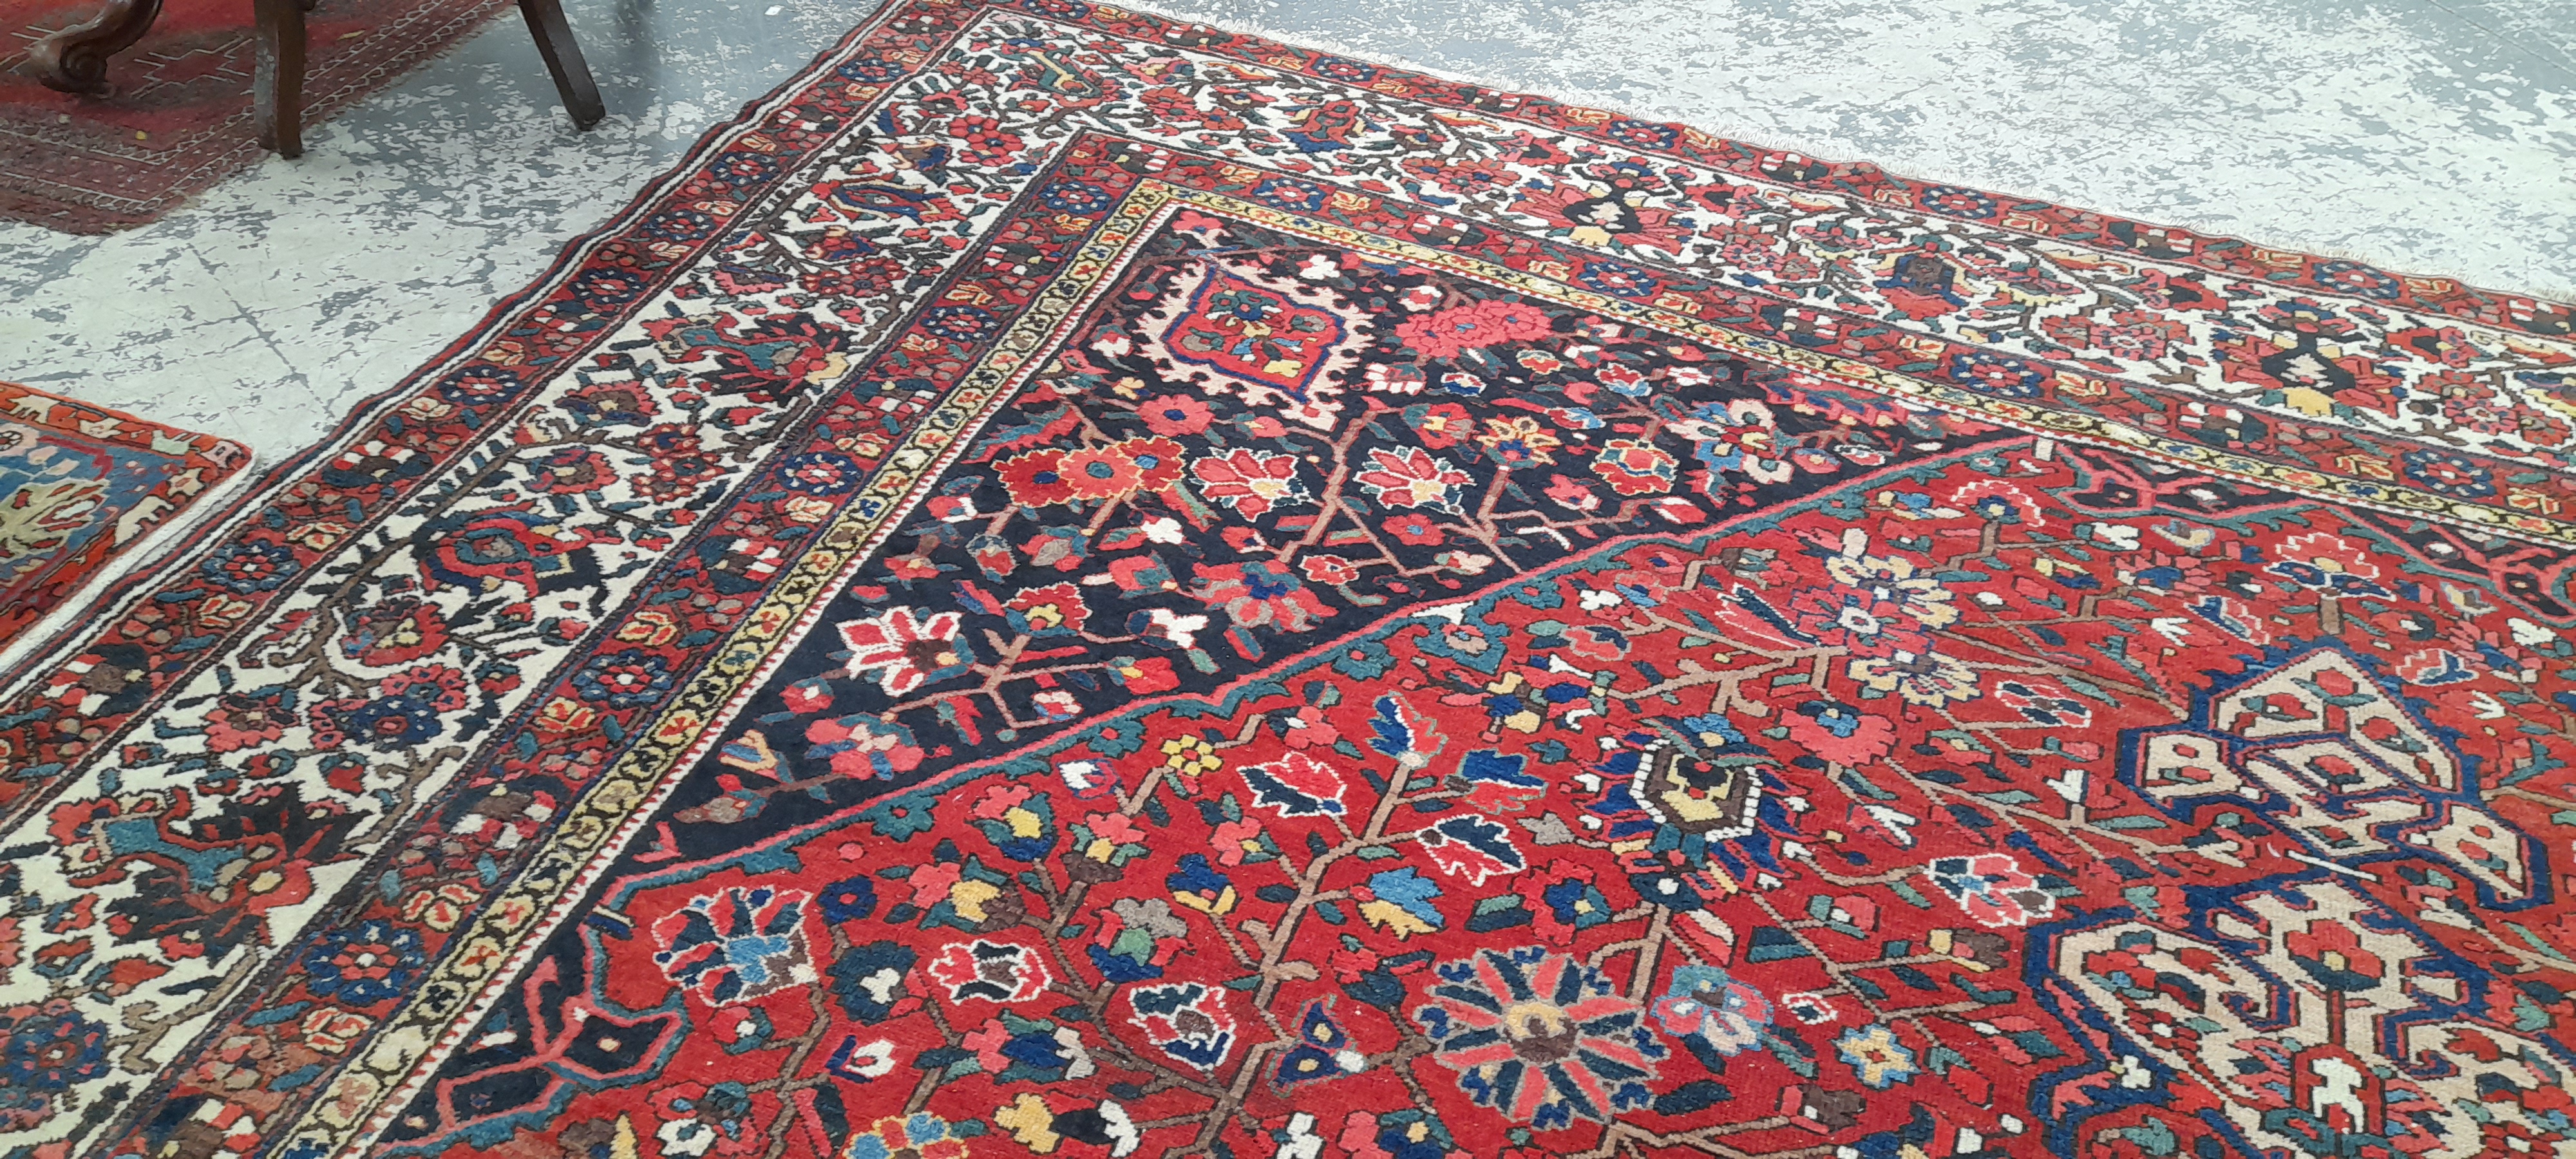 A COUNTRY HOUSE PERSIAN BAHKTIARI CARPET. 560 x 396cms - Image 6 of 8